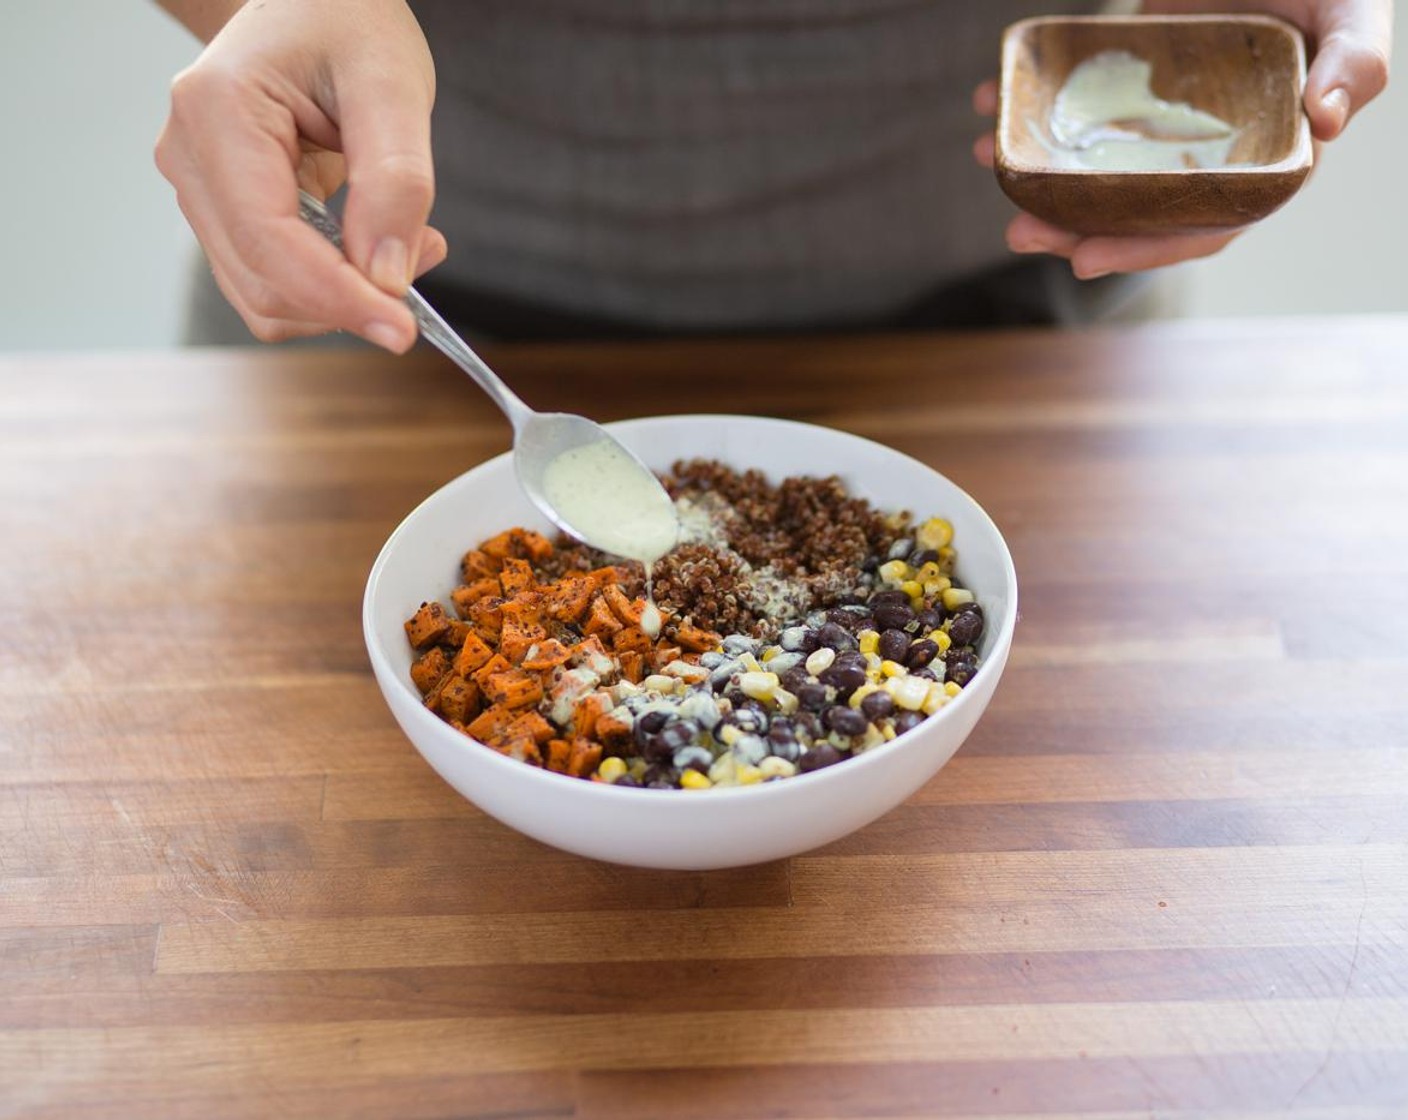 step 10 In the center of two bowls, place the quinoa. Top each serving with corn, roasted sweet potatoes and black beans. Drizzle with the cilantro crema. Serve and enjoy!